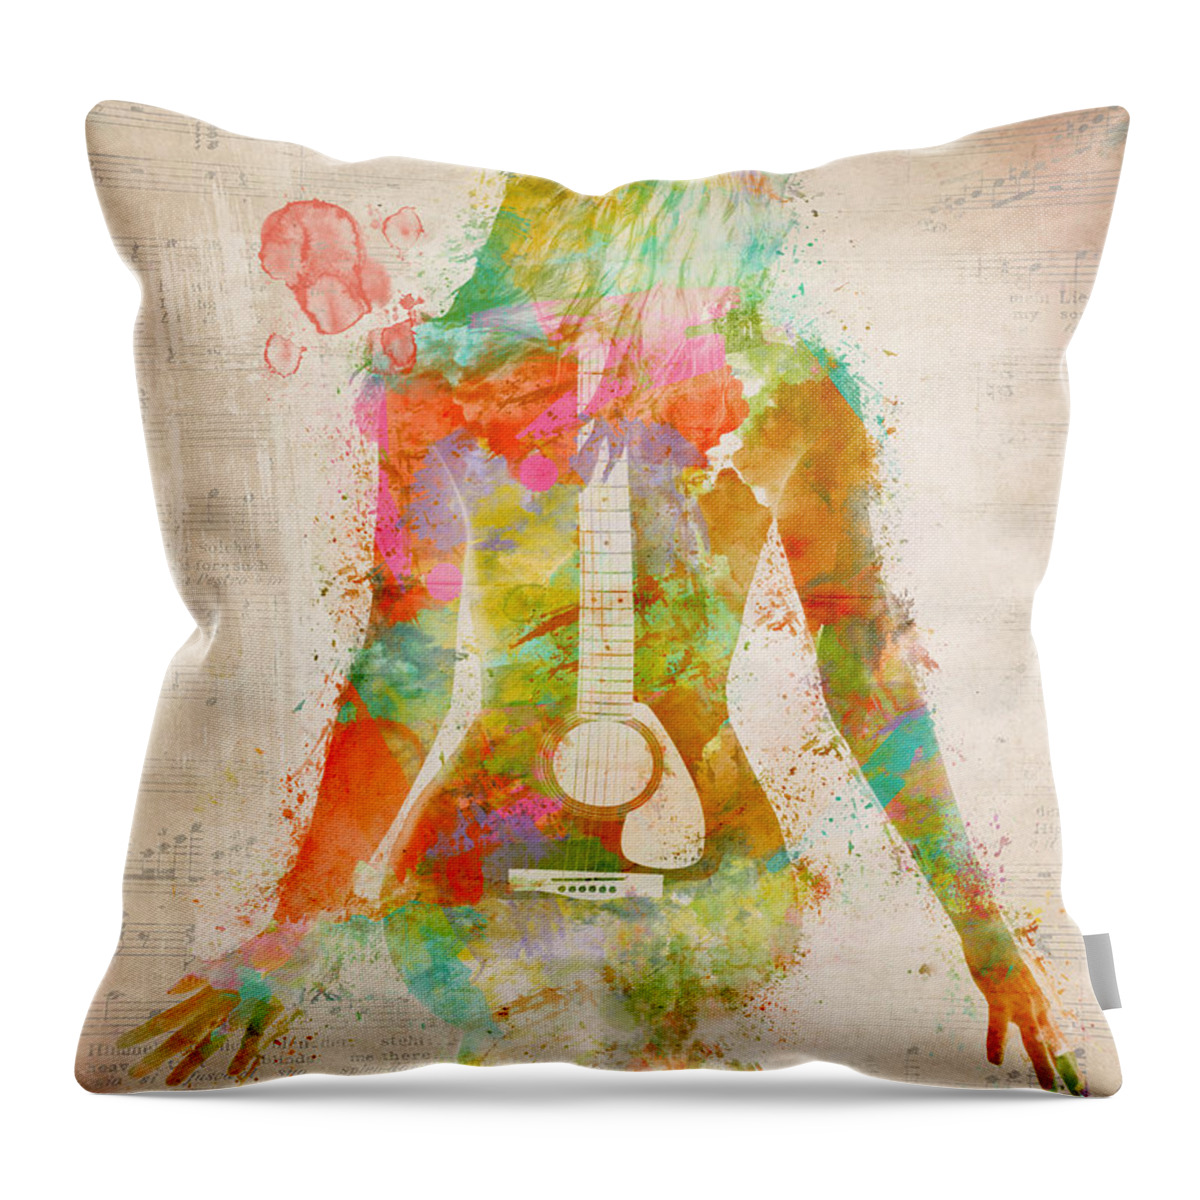 Guitar Throw Pillow featuring the digital art Music Was My First Love by Nikki Marie Smith